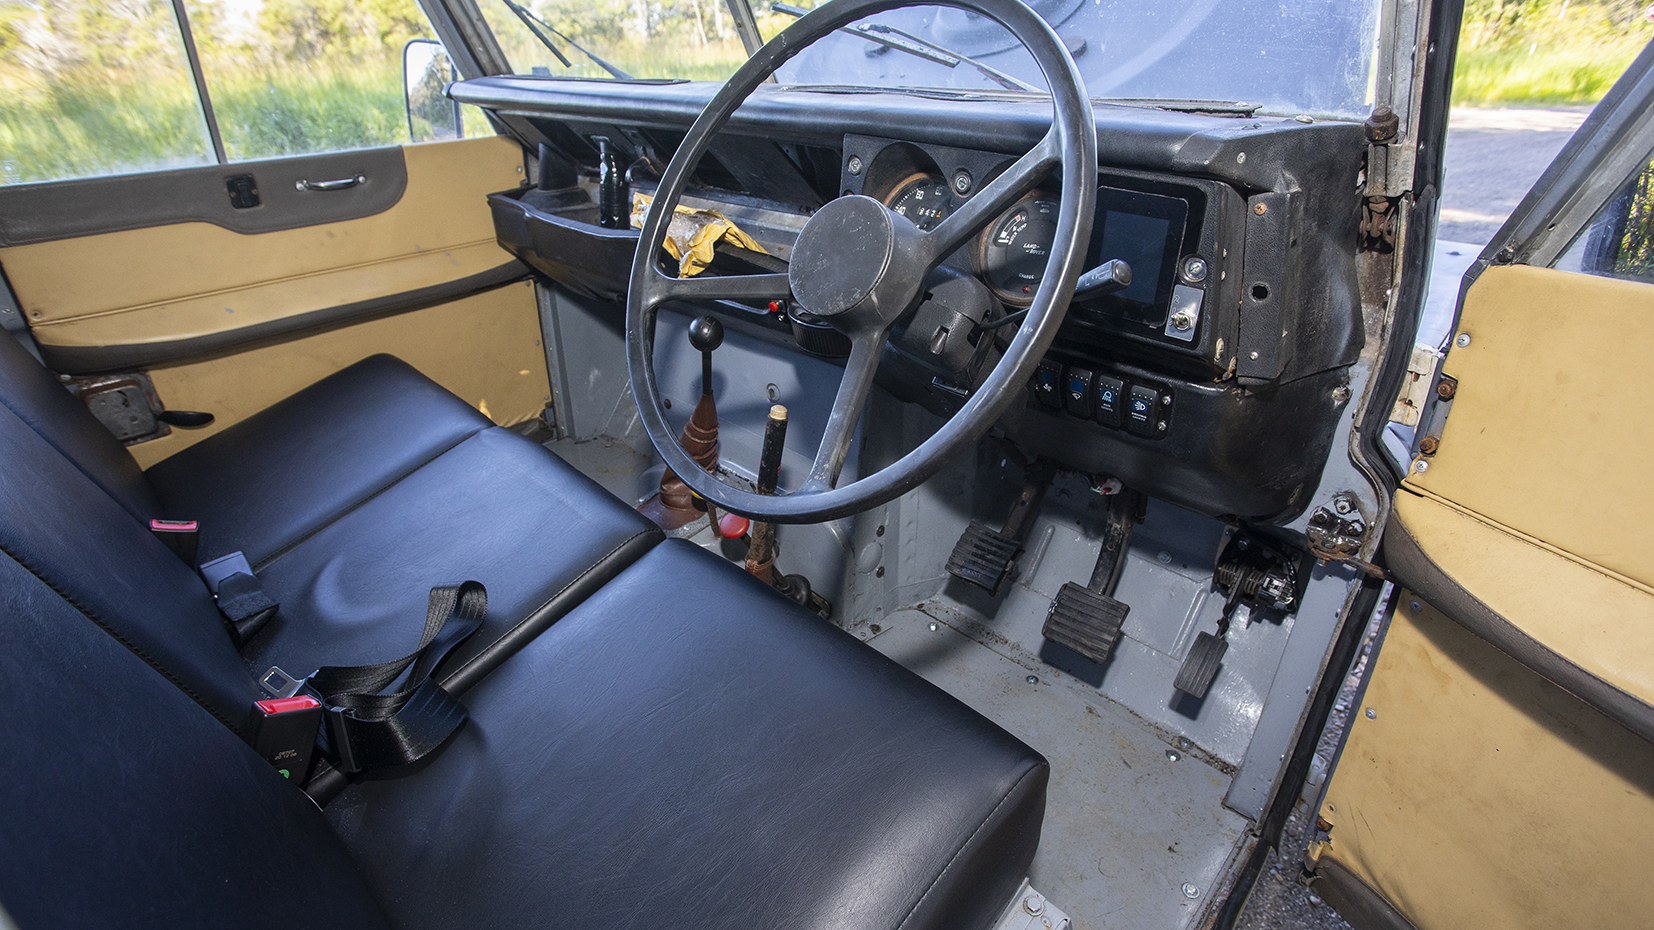 1974 Land Rover Series III with electric conversion